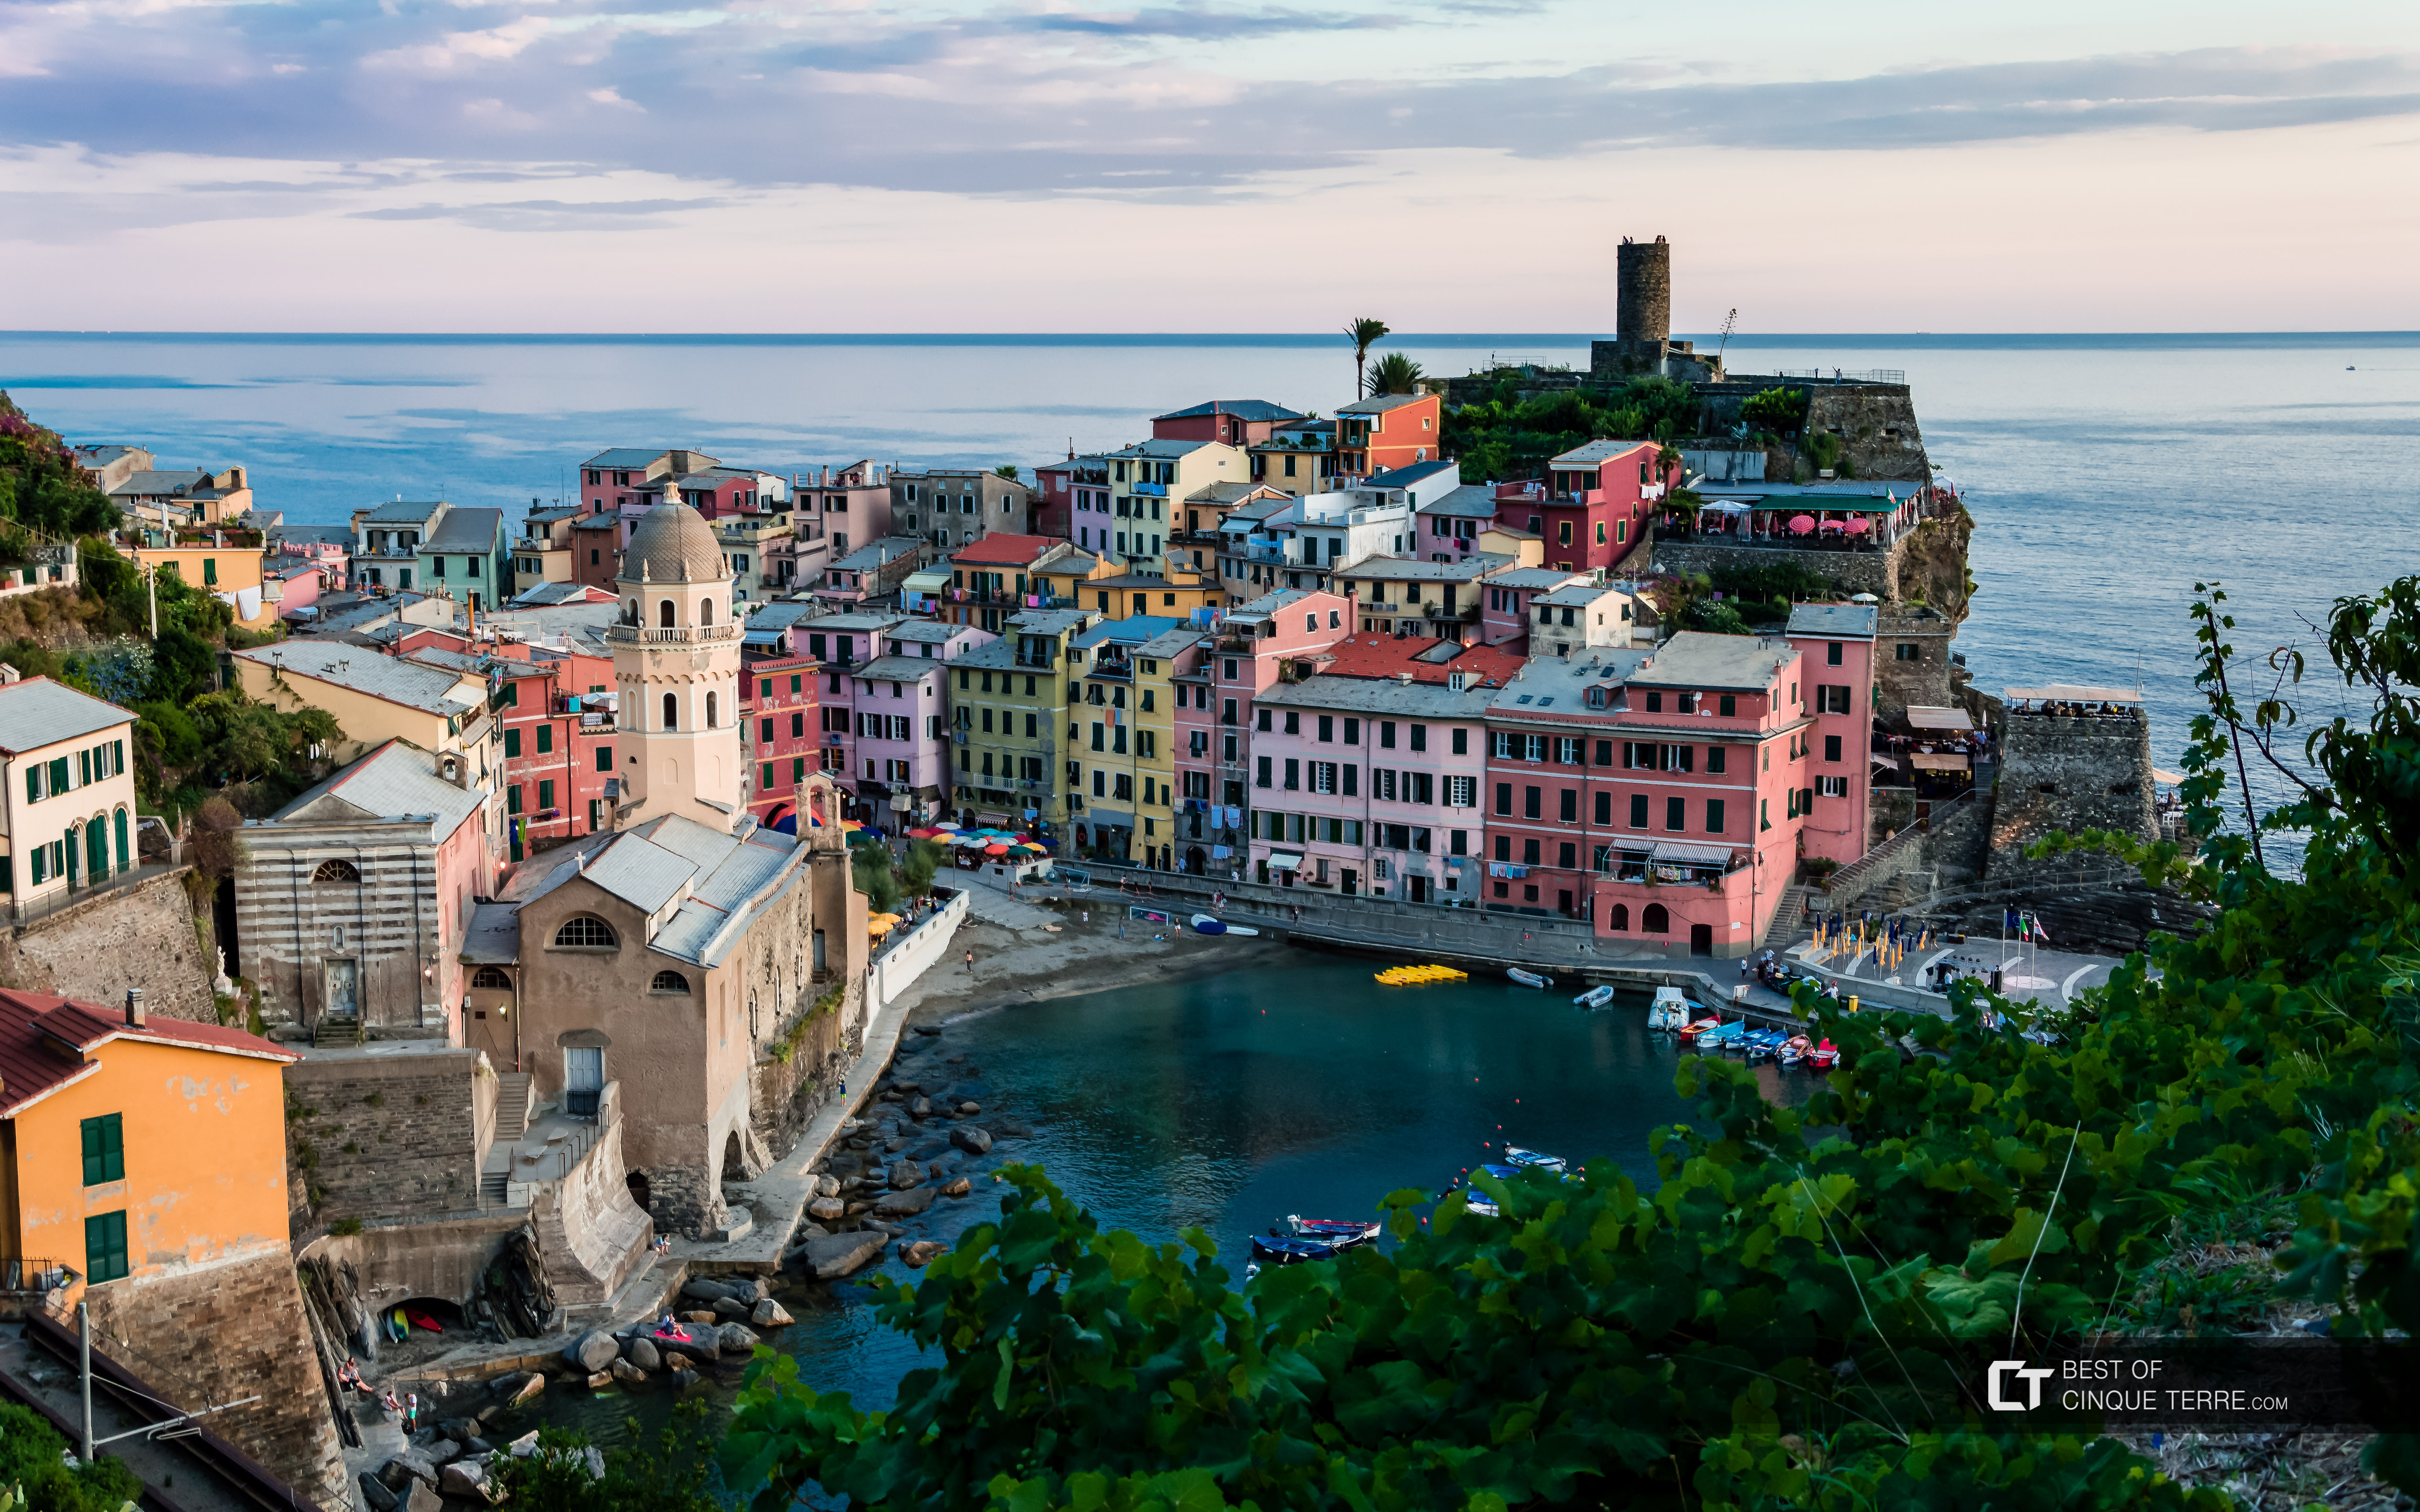 View of the bay, Vernazza, Cinque Terre, Italy